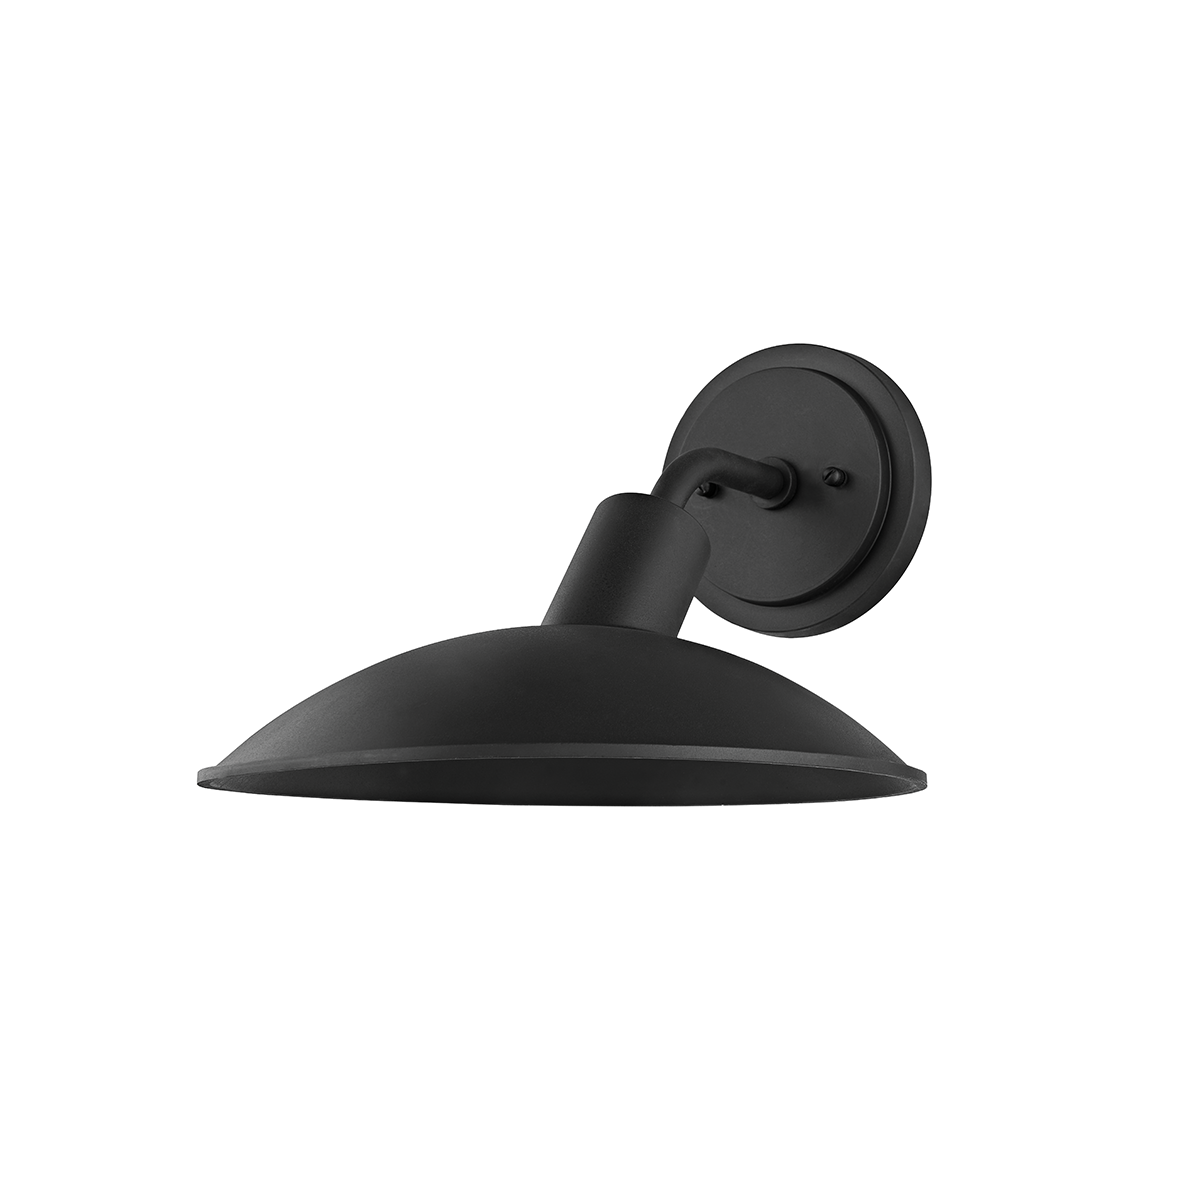 Troy Lighting 1 LIGHT SMALL EXTERIOR WALL SCONCE B8812 Outdoor l Wall Troy Lighting TEXTURE BLACK  